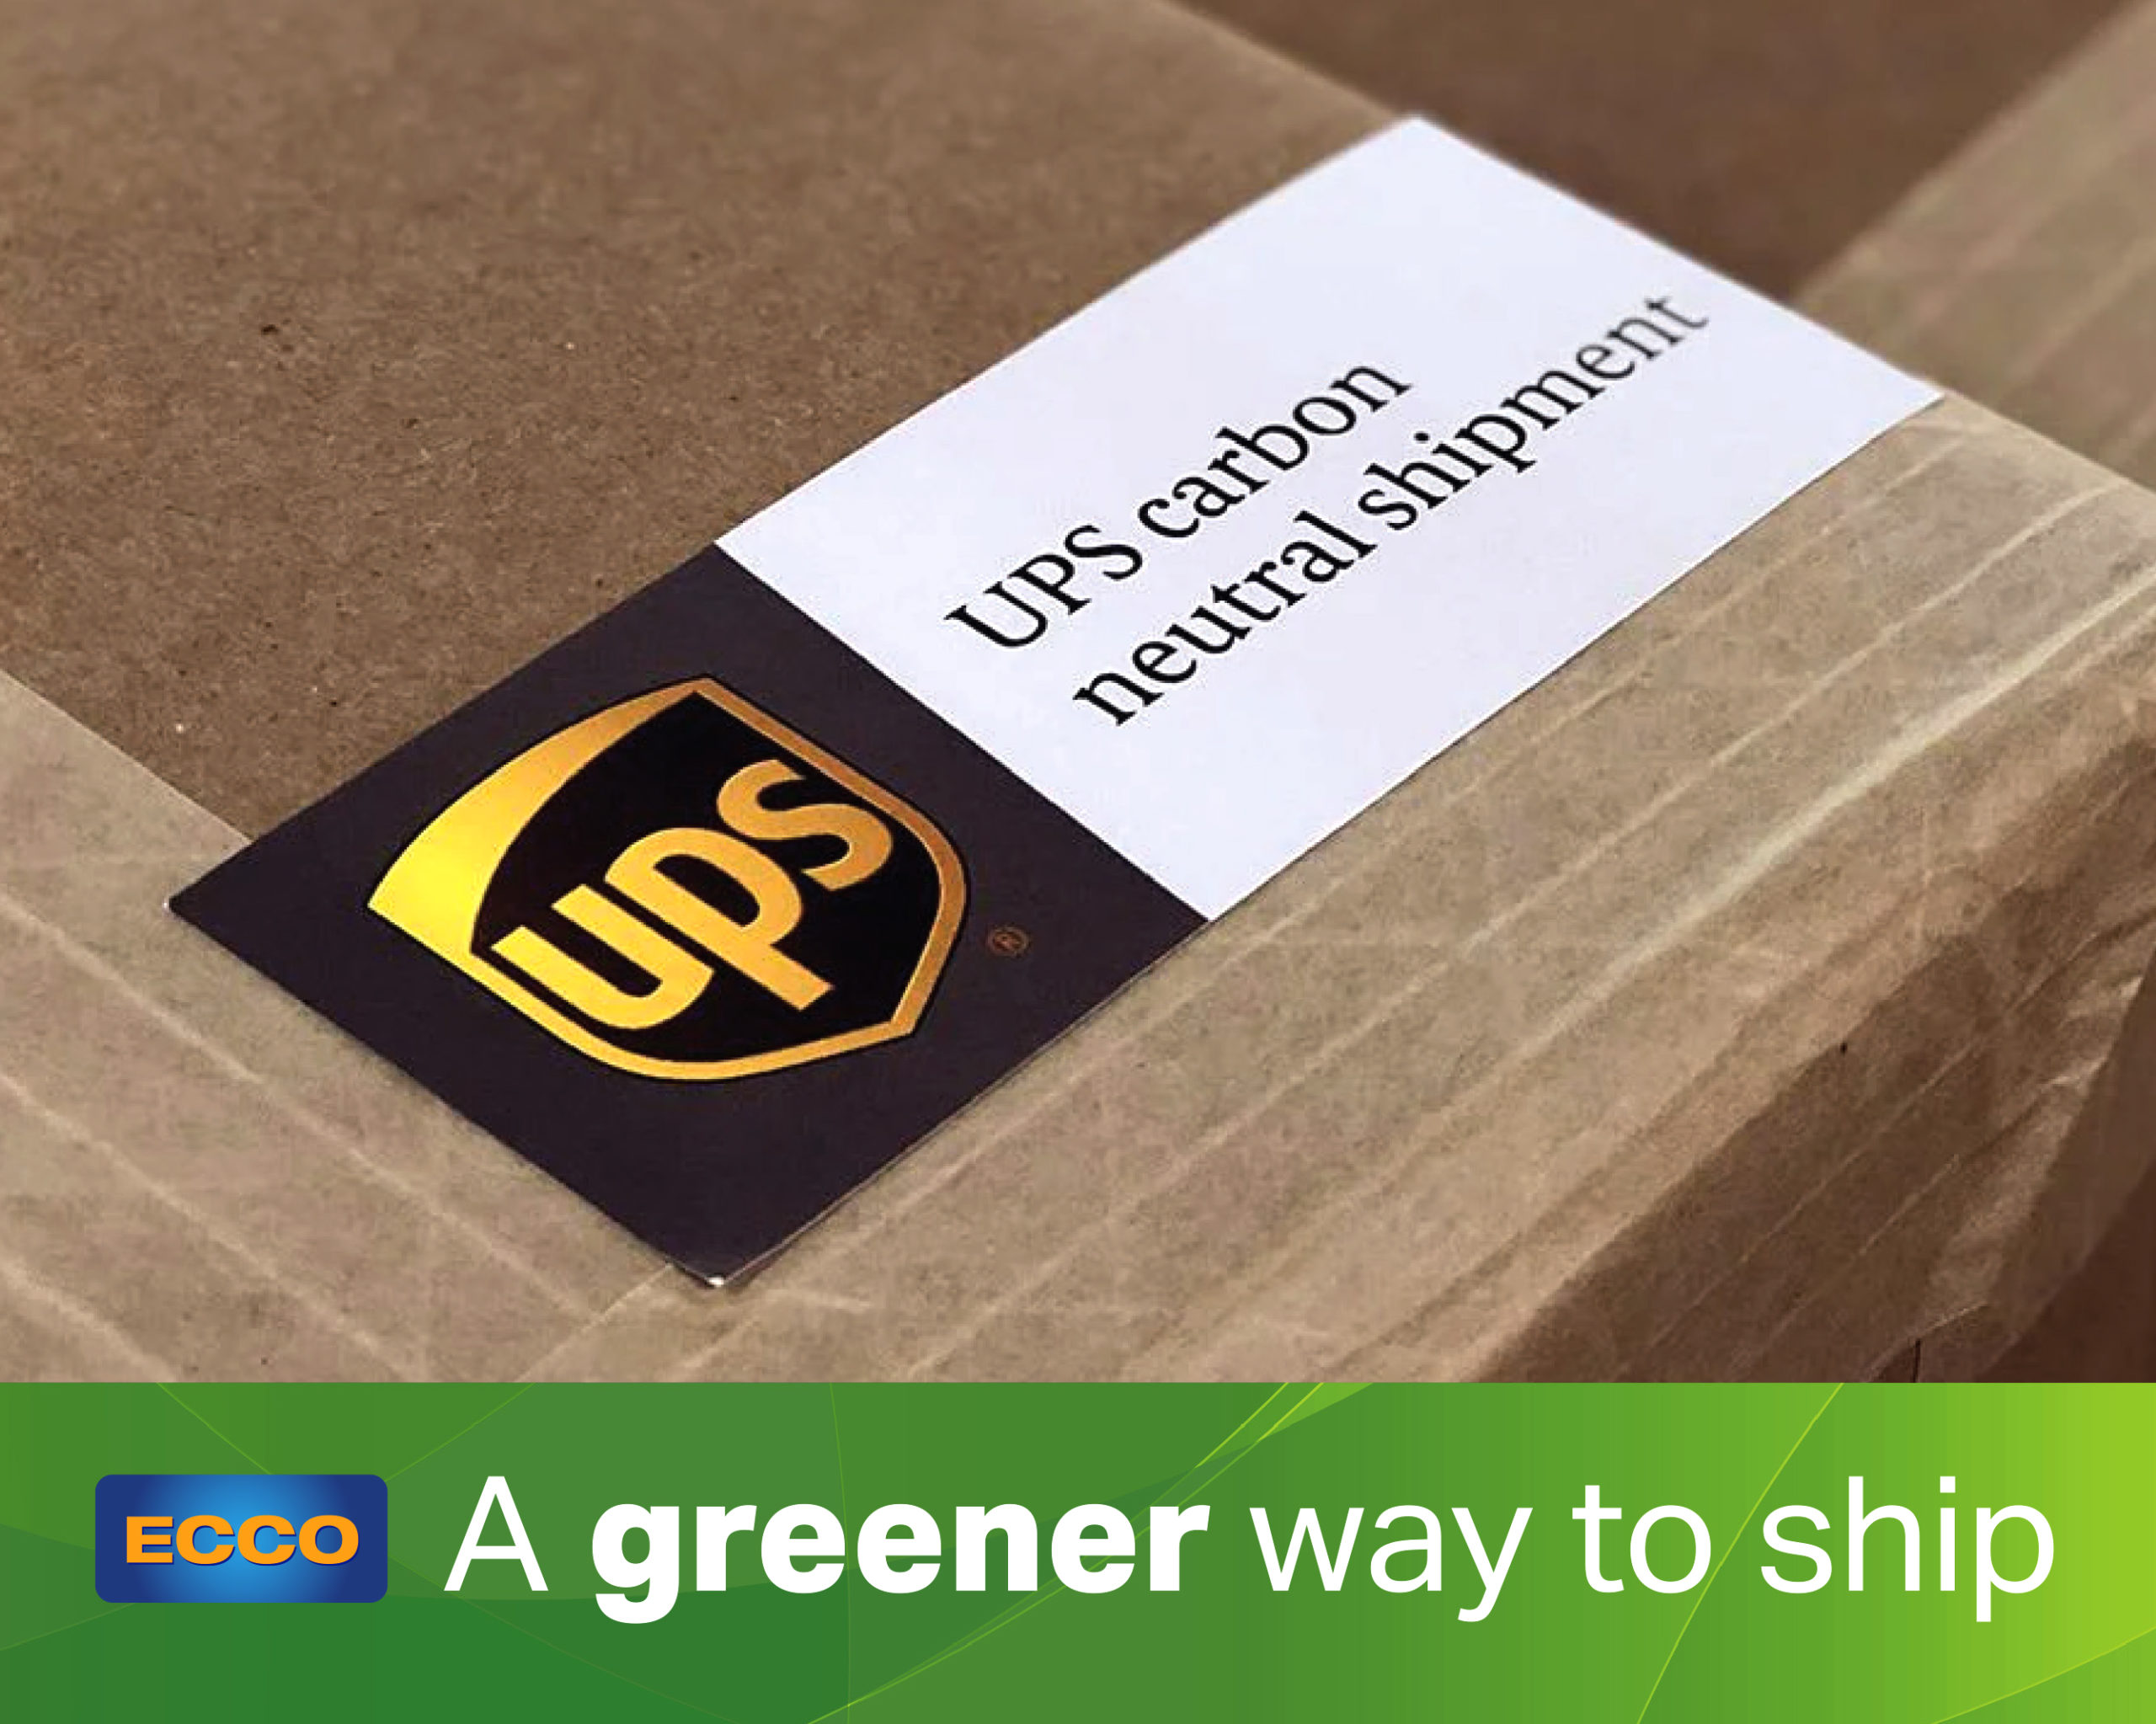 ECCO Makes Major Moves with UPS for Sustainability